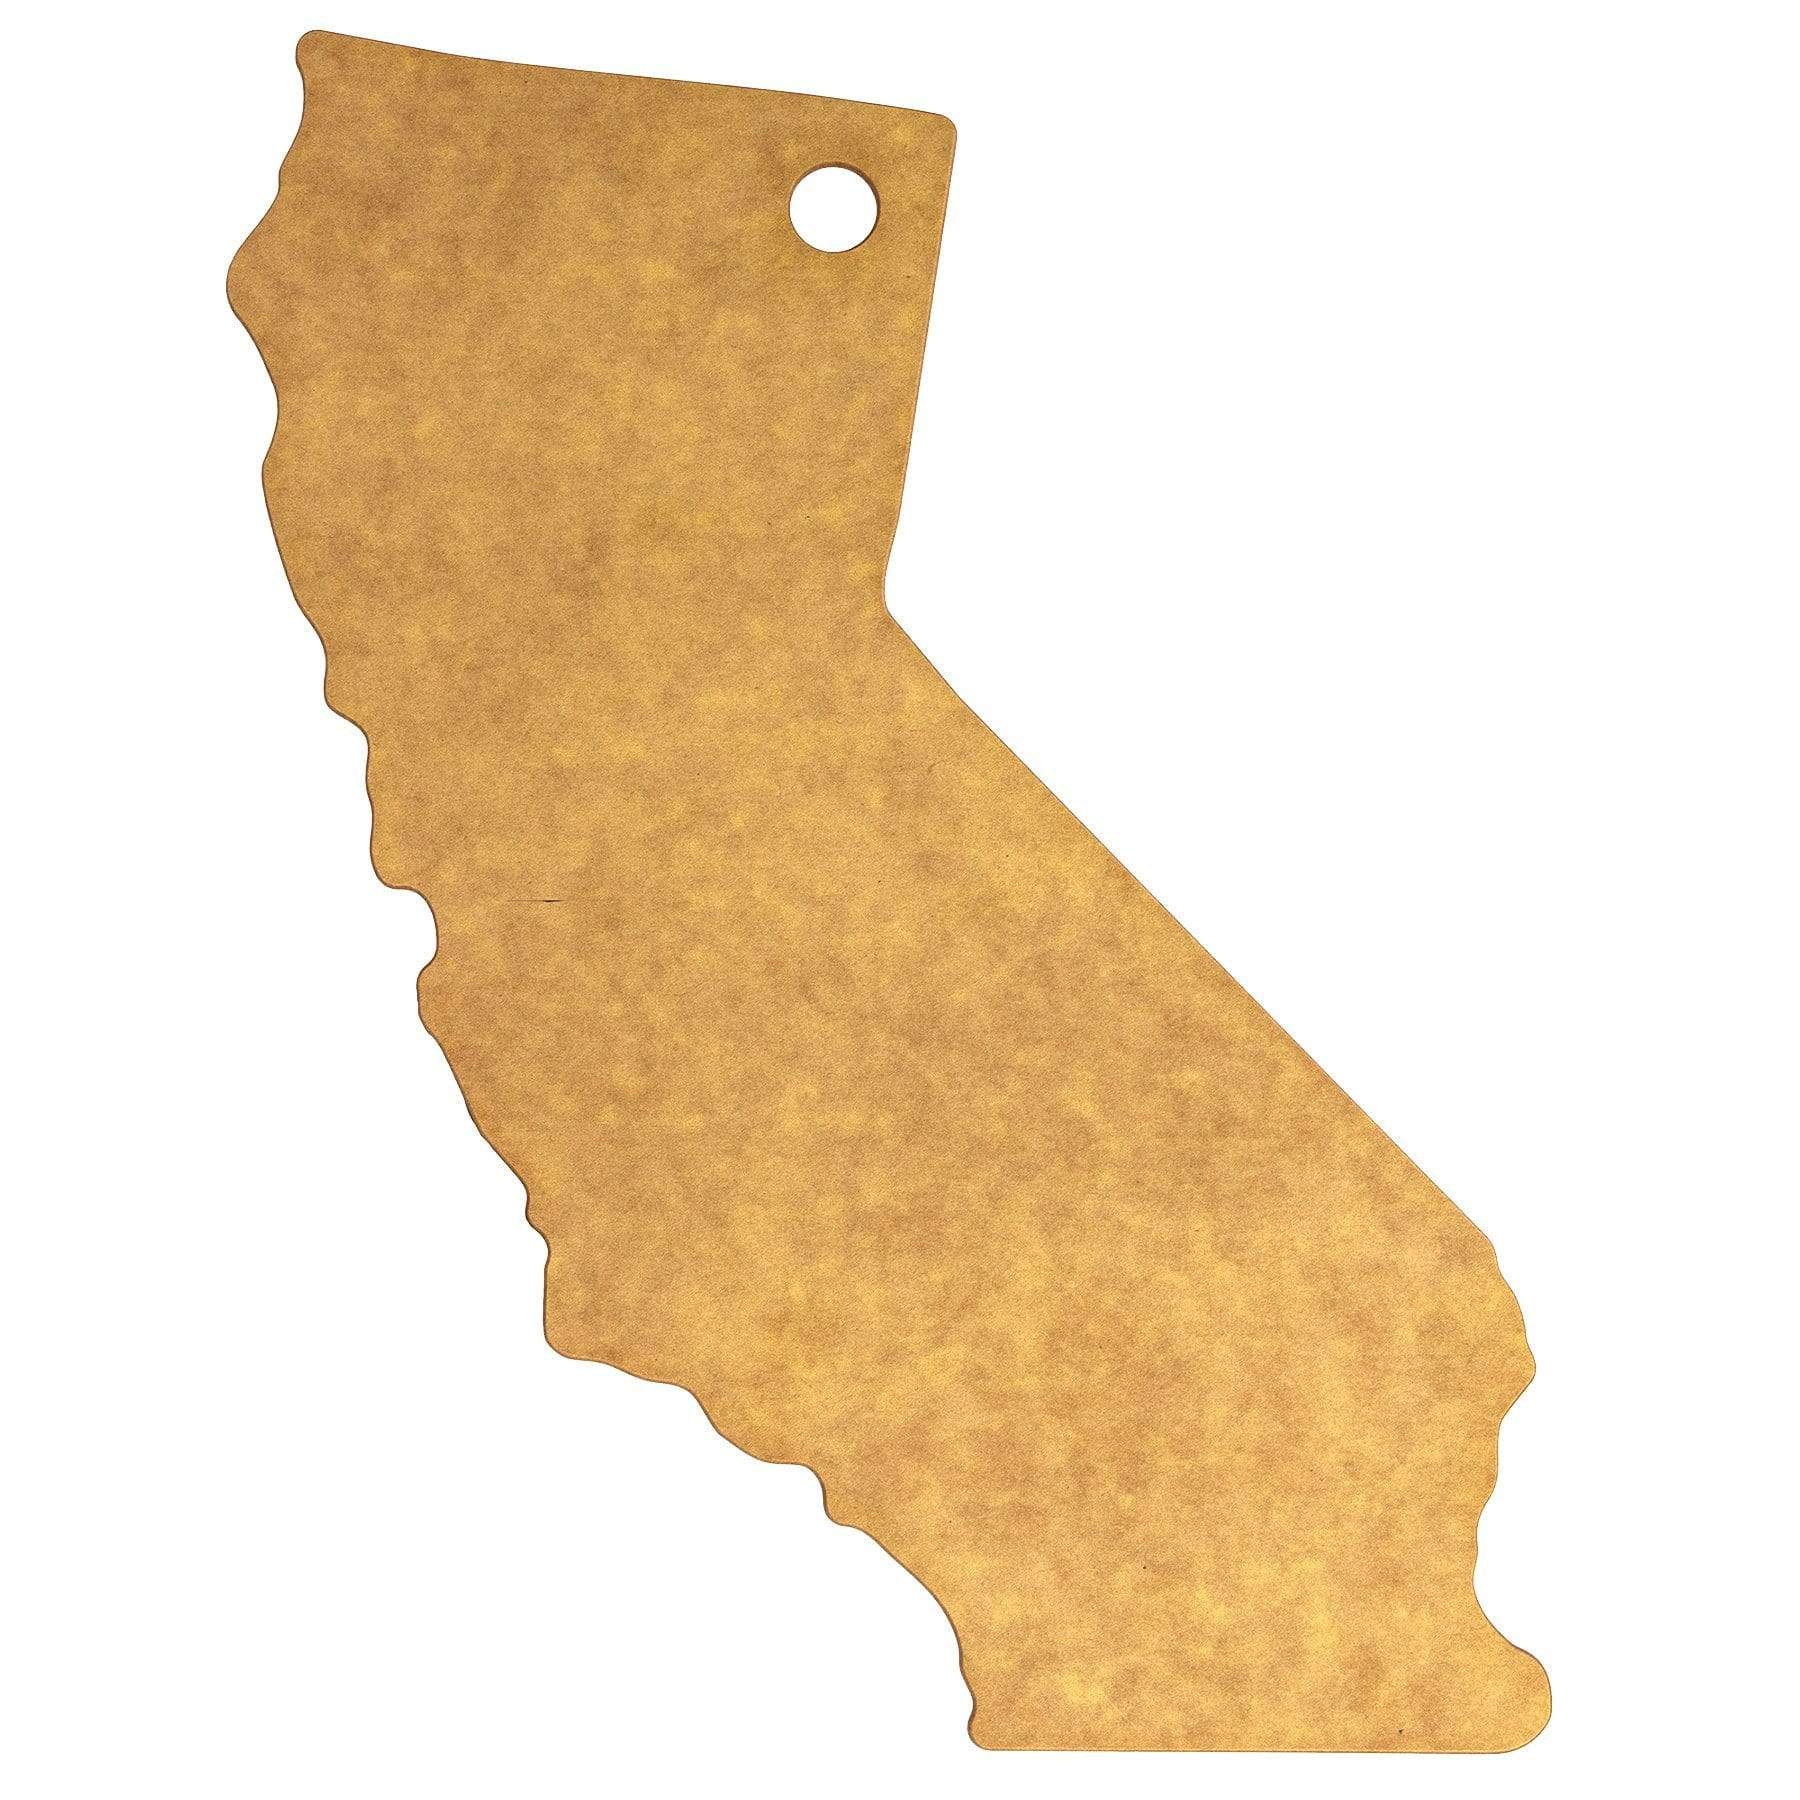 Totally Bamboo Vellum™ California Shaped Wood Paper Composite Serving and Cutting Board, 14-1/4" x 11" | Dishwasher Safe